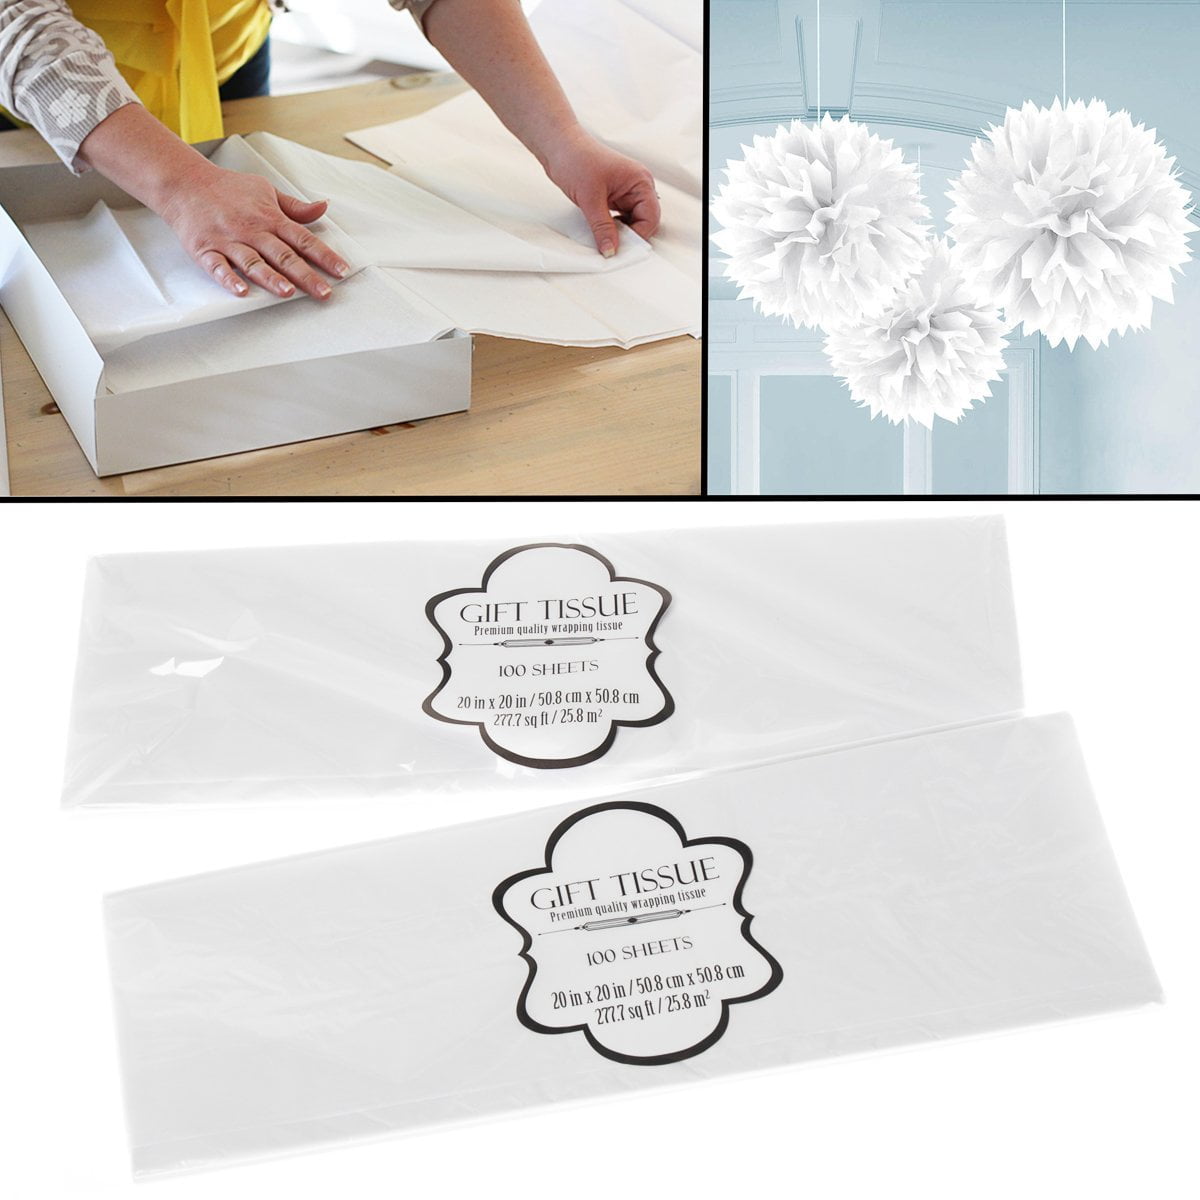 JAM PAPER Tissue Paper White 20 Sheets/Pack (11537395A)